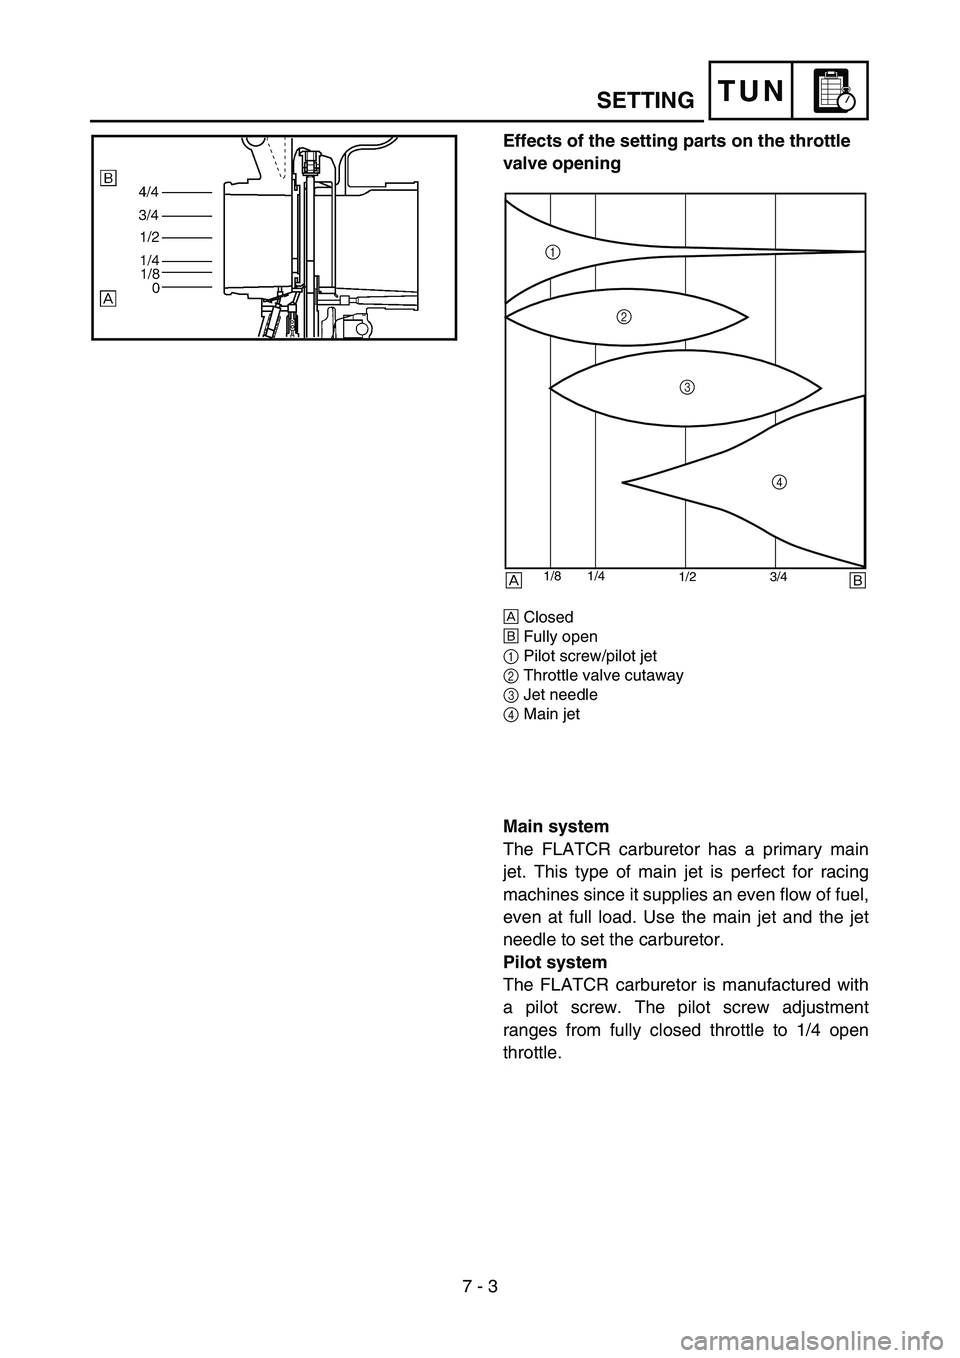 YAMAHA YZ250F 2007  Owners Manual 7 - 3
TUNSETTING
Effects of the setting parts on the throttle 
valve opening
ÈClosed
ÉFully open
1Pilot screw/pilot jet
2Throttle valve cutaway
3Jet needle
4Main jet
1/2 3/4 1/4 1/8
1
2
3
4
ÈÉ 
Ma